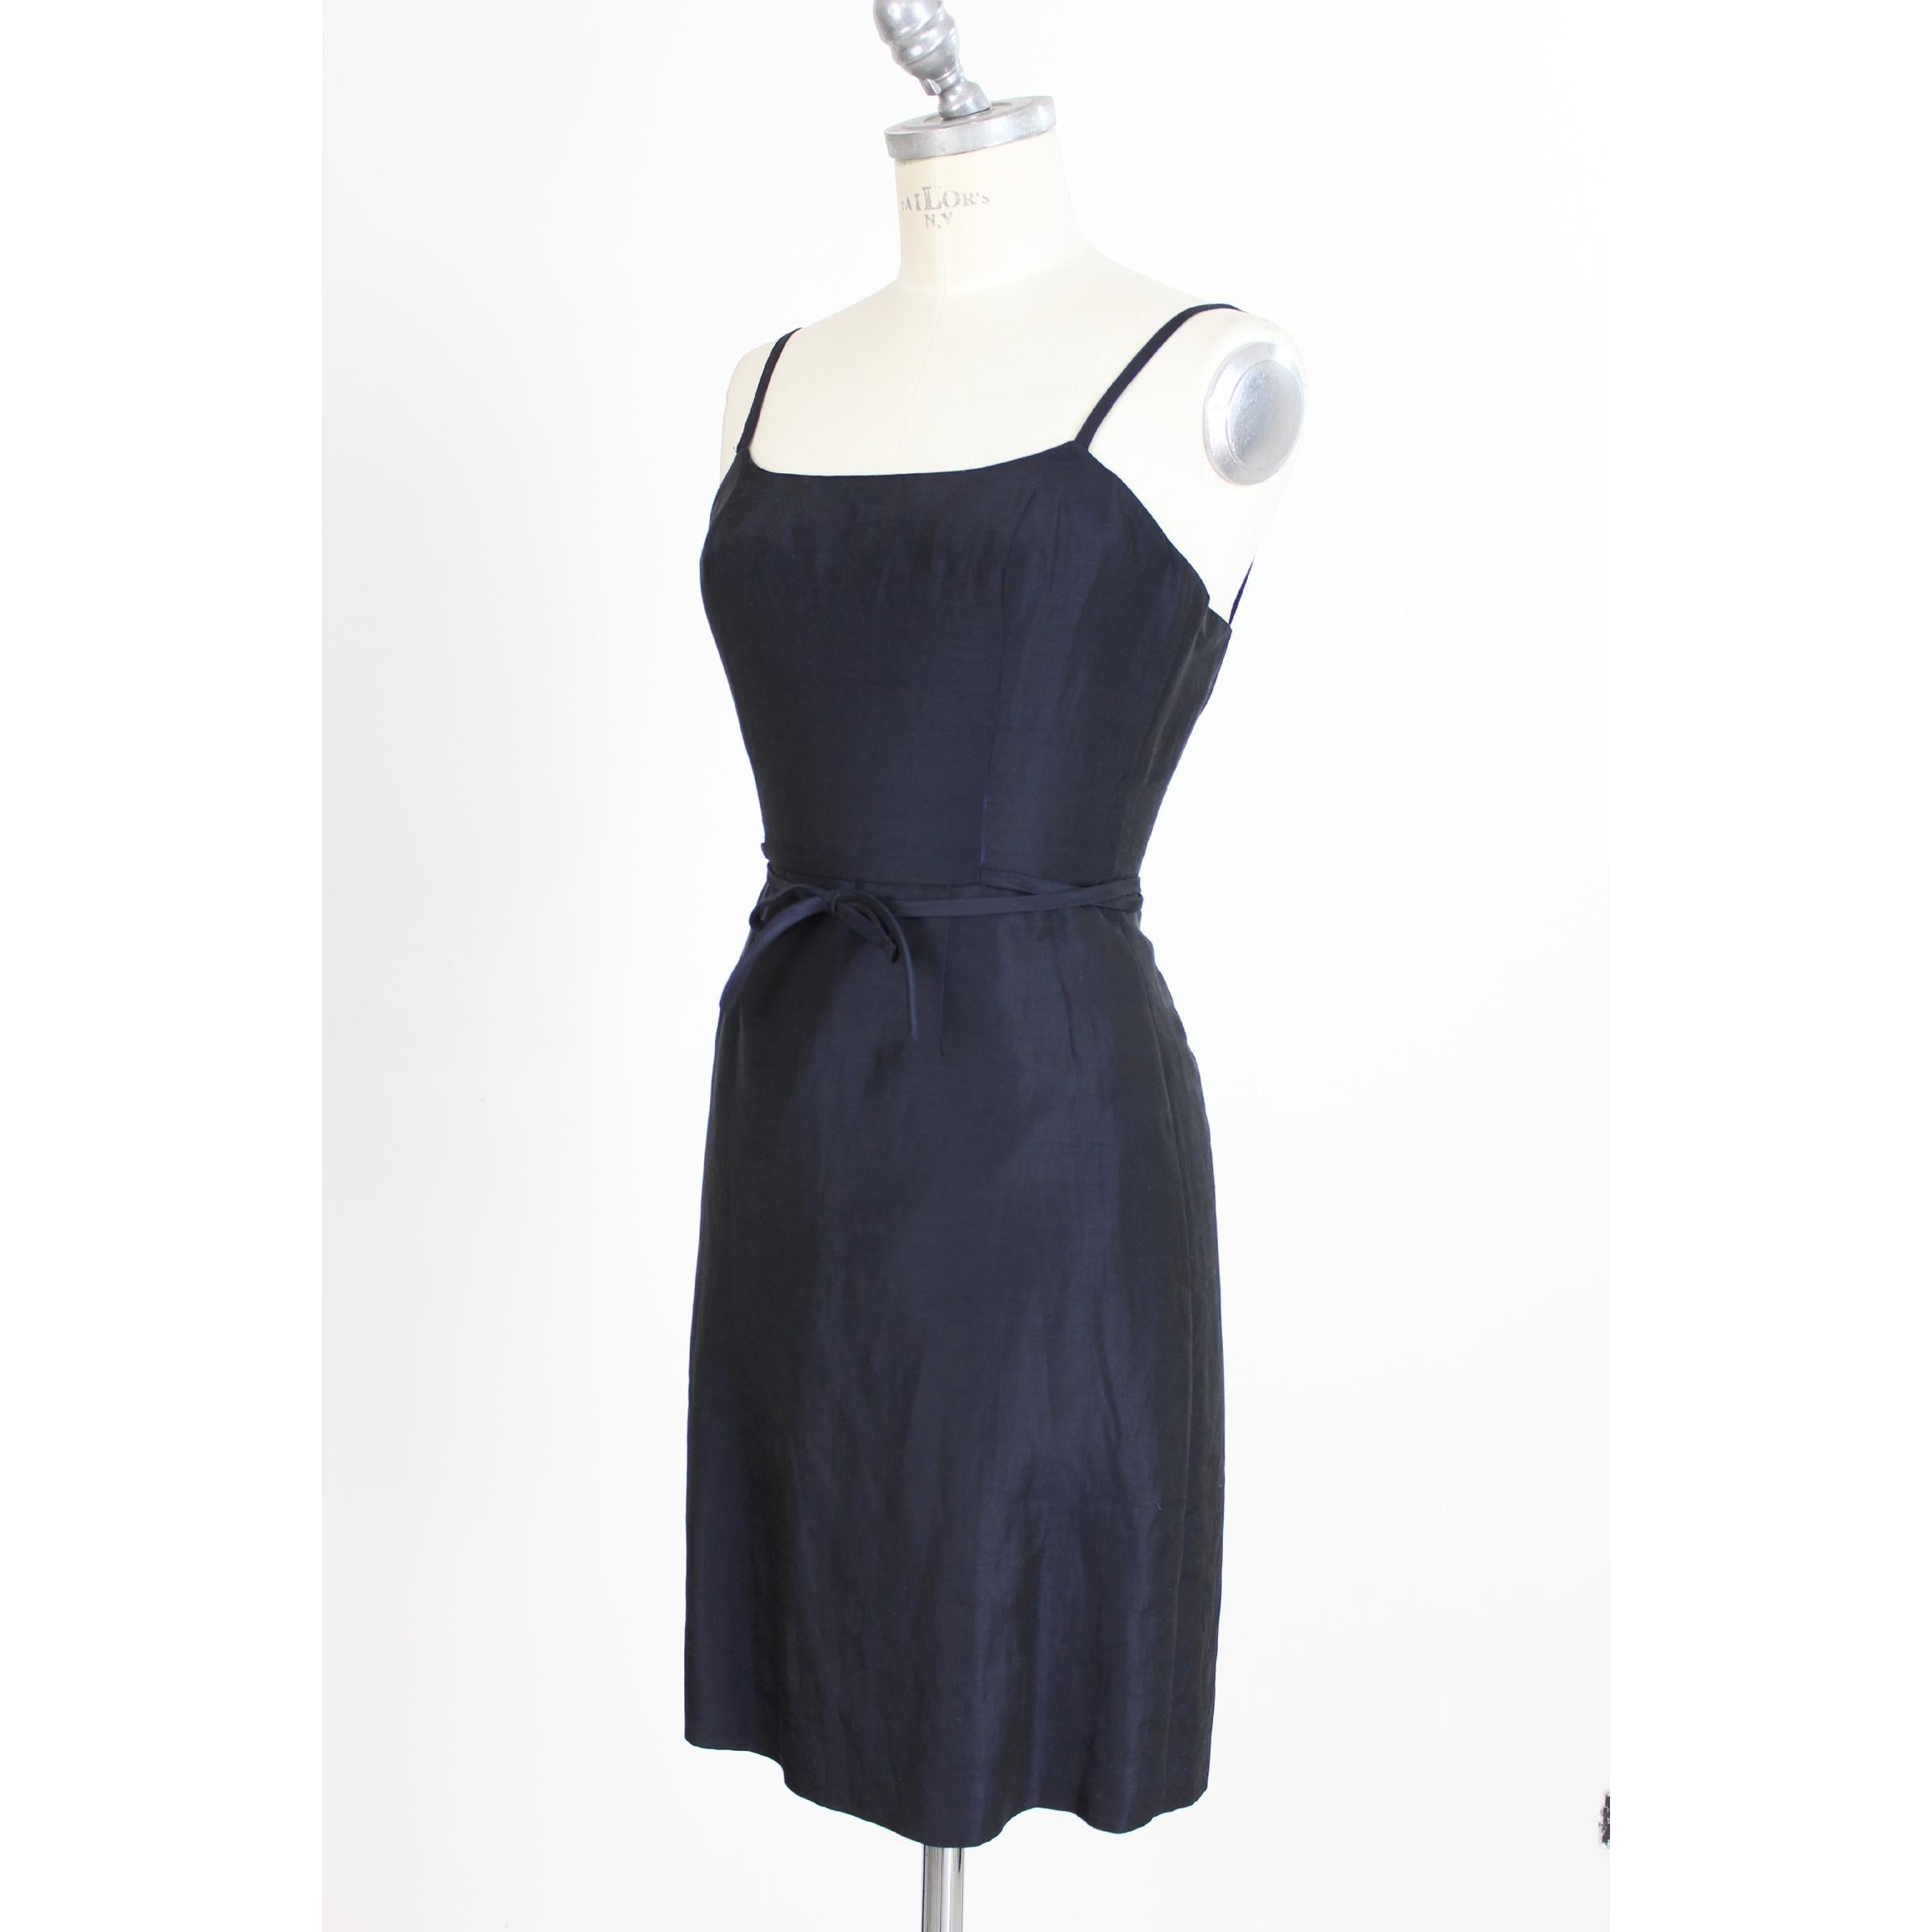 Alberto Biani evening dress made of 52% acetate 48% linen. Dark blue sheath dress model. Sleeveless, square neckline and adjustable waistband. The bodice is made of slats, zip closure. Made in Italy. Excellent vintage conditions.

Size 40 It 6 Us 8